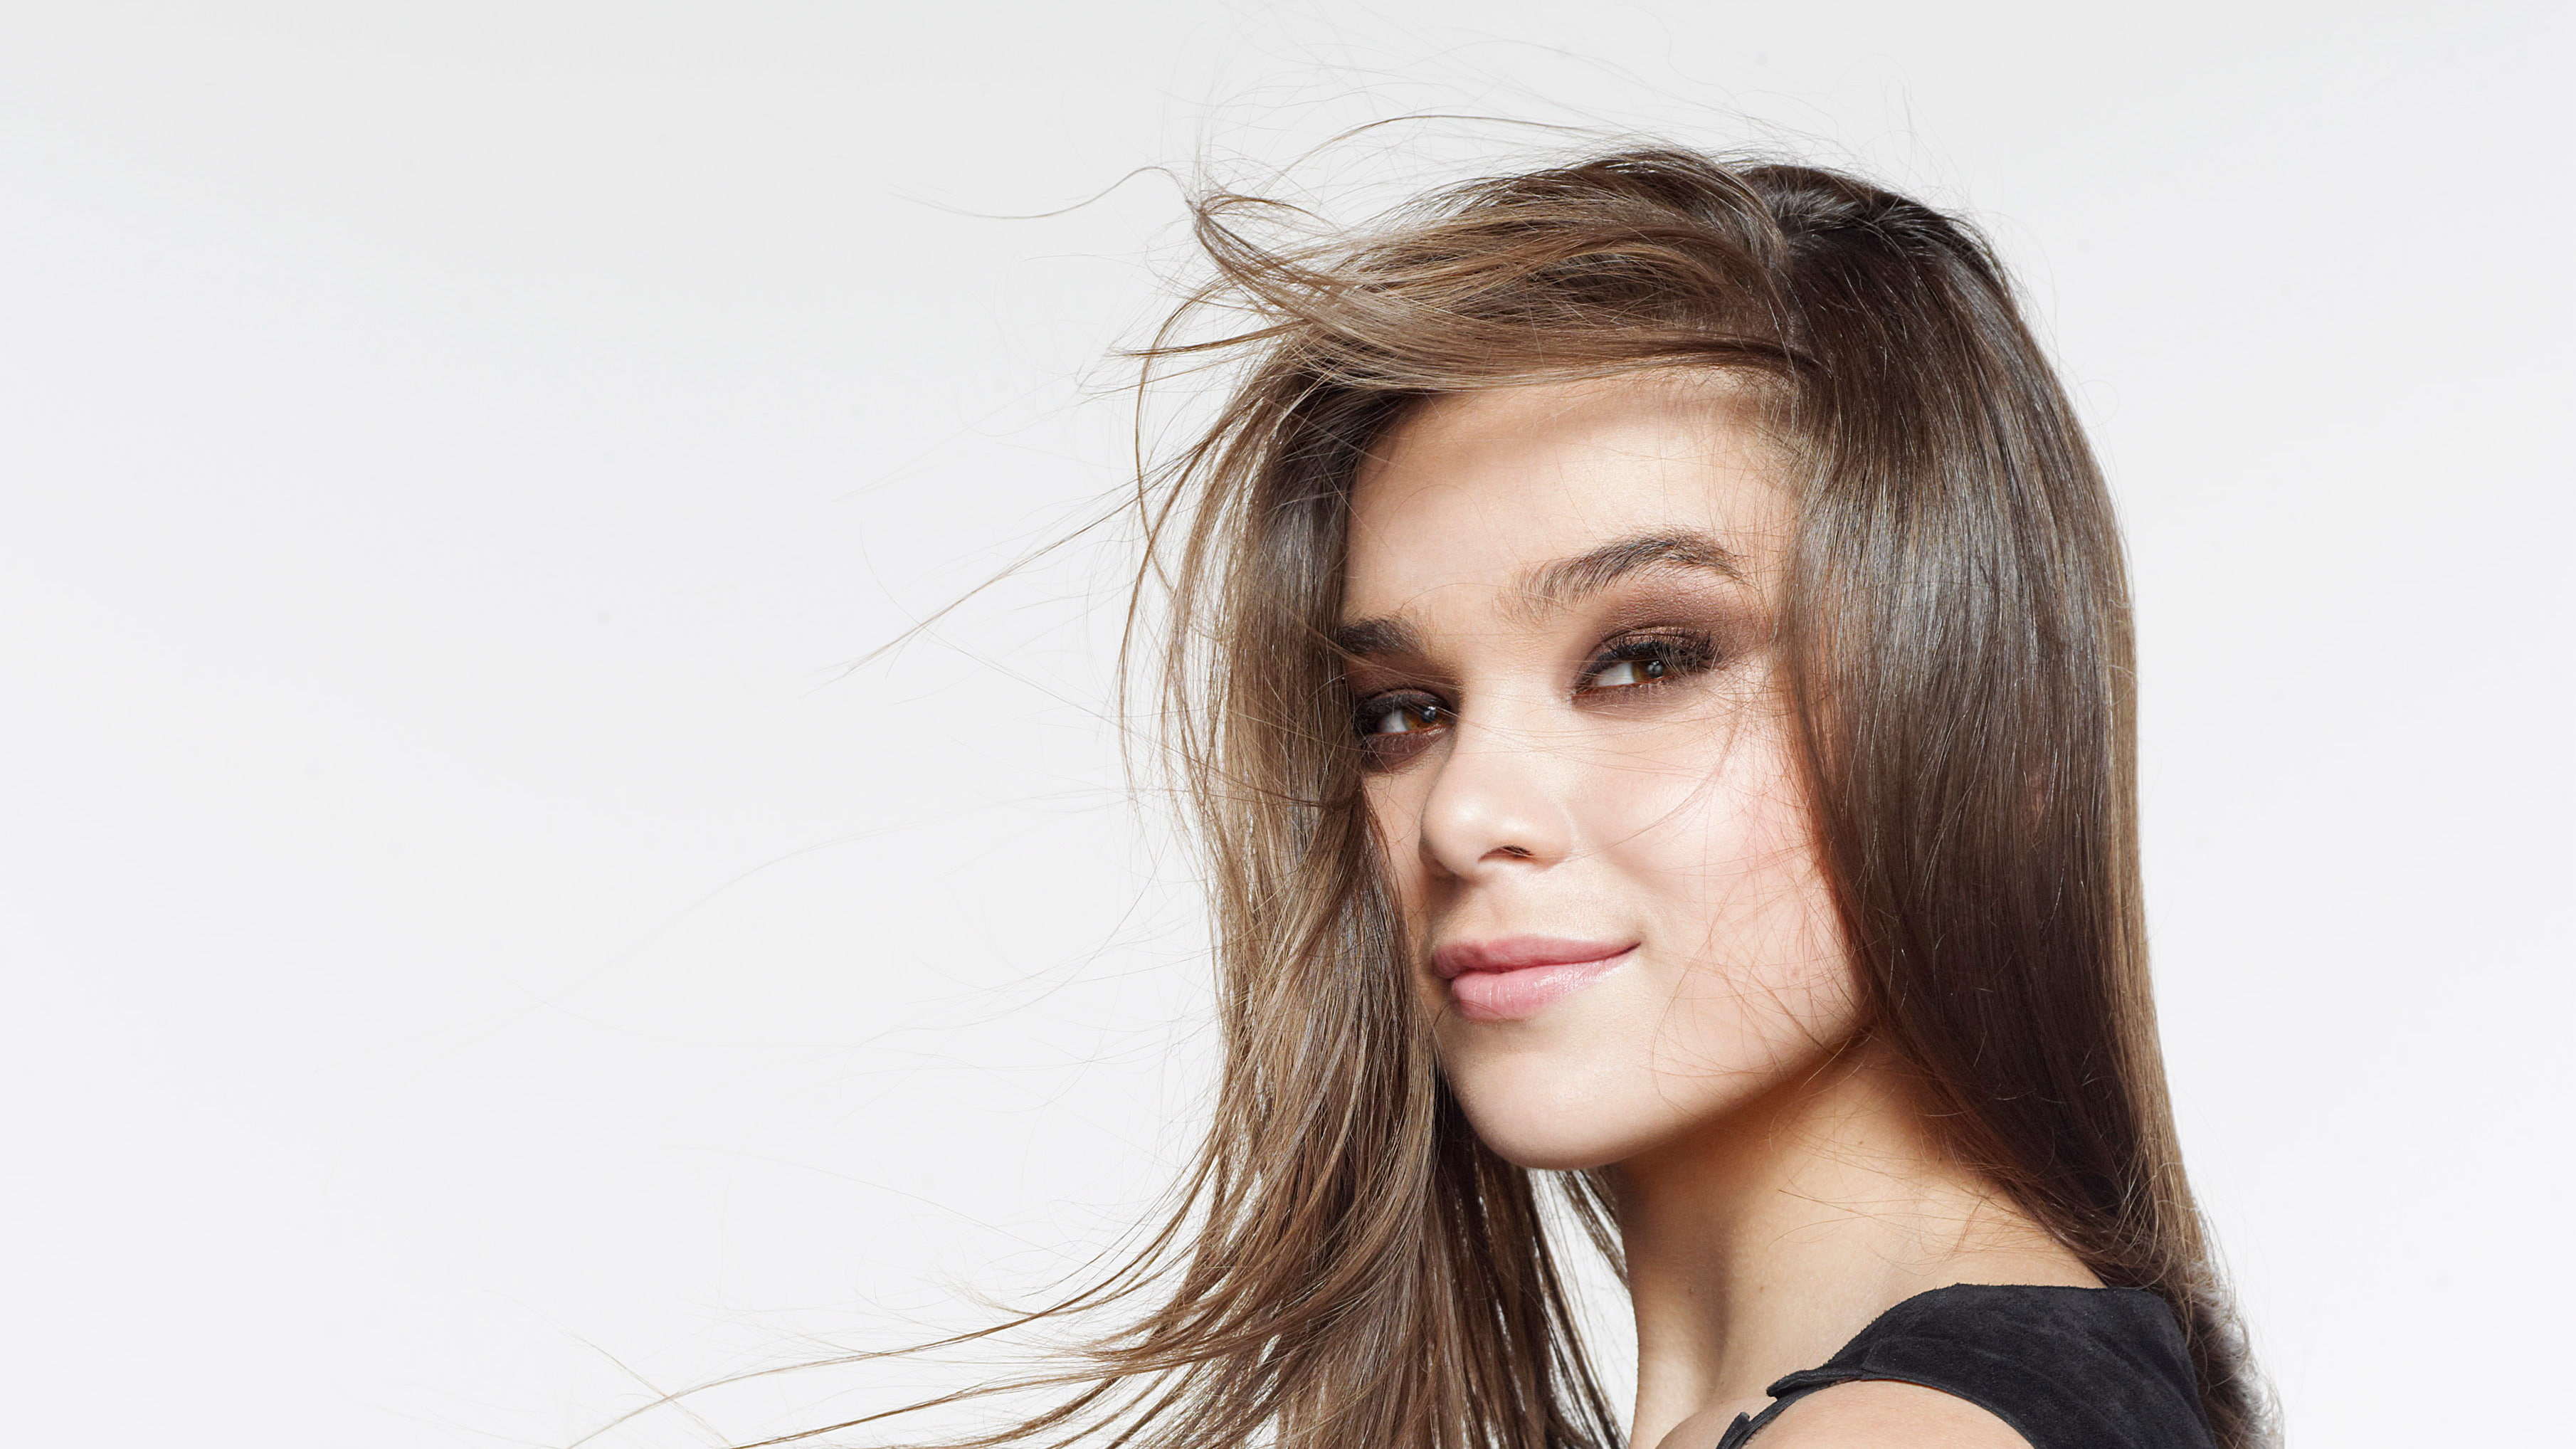 Hailee Steinfeld, 4K, headshot, portrait, one person, young adult